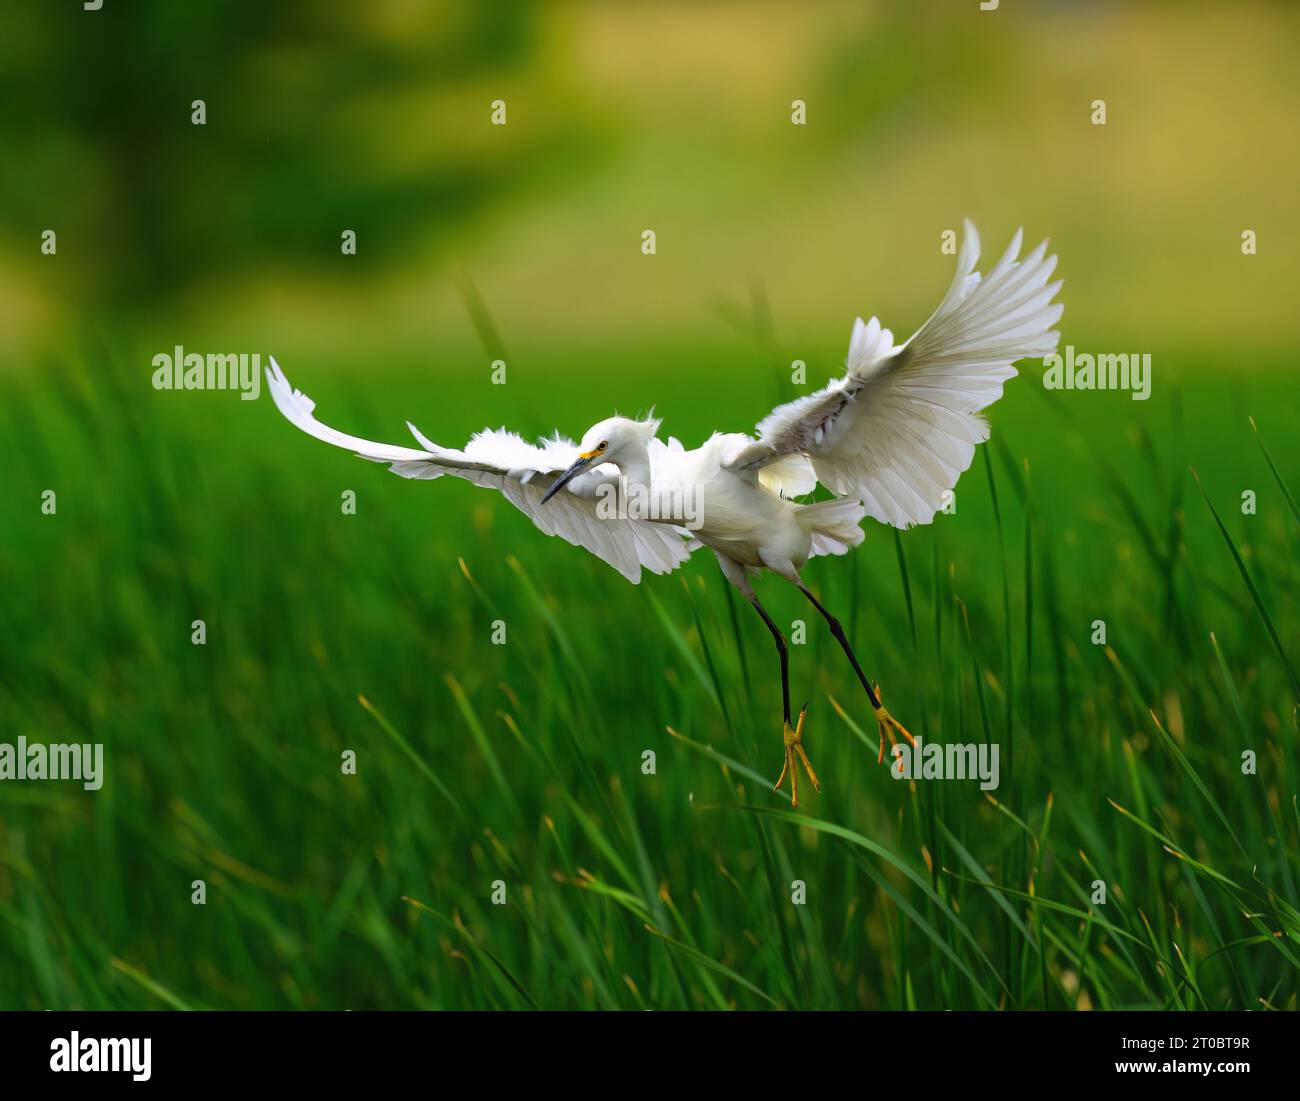 A Snowy Egret with angelic wings coming in for a landing in a field of green reeds. Stock Photo